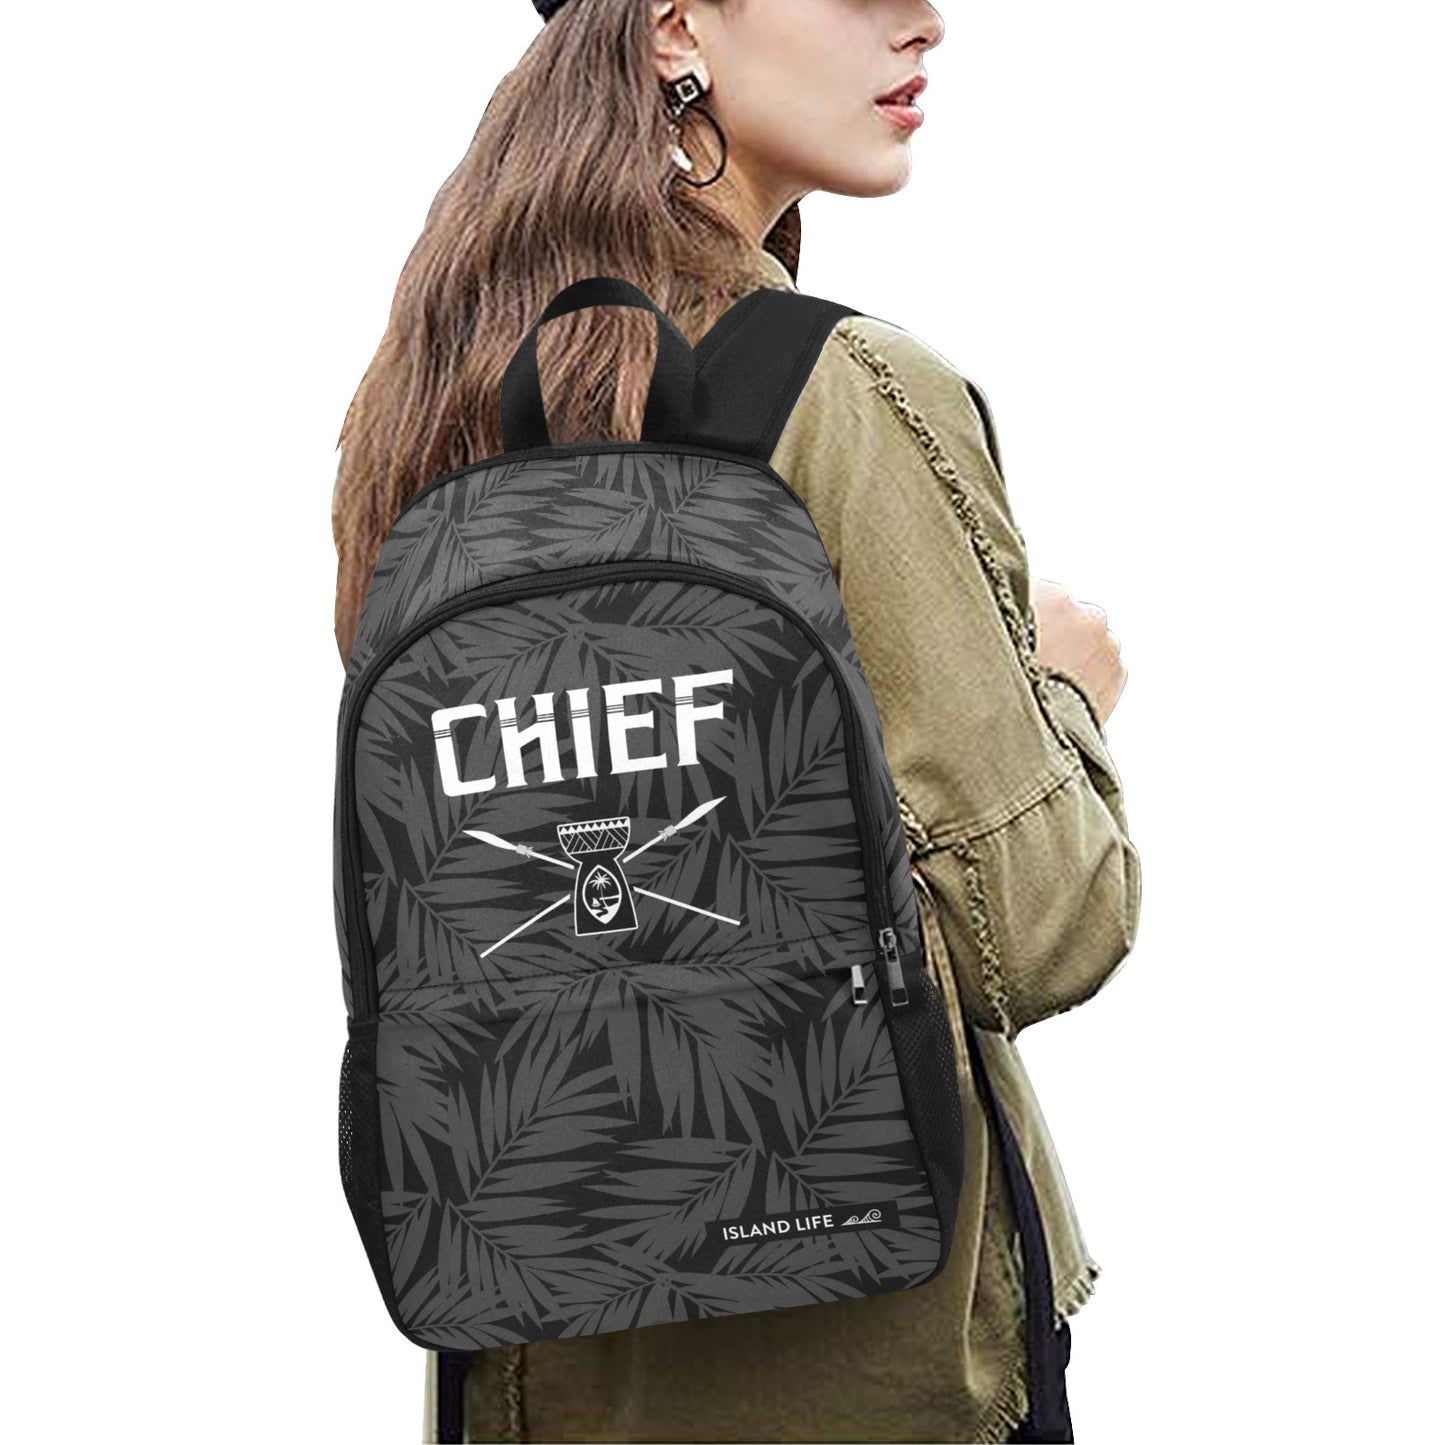 Guam Chief Laptop Side Pockets Backpack